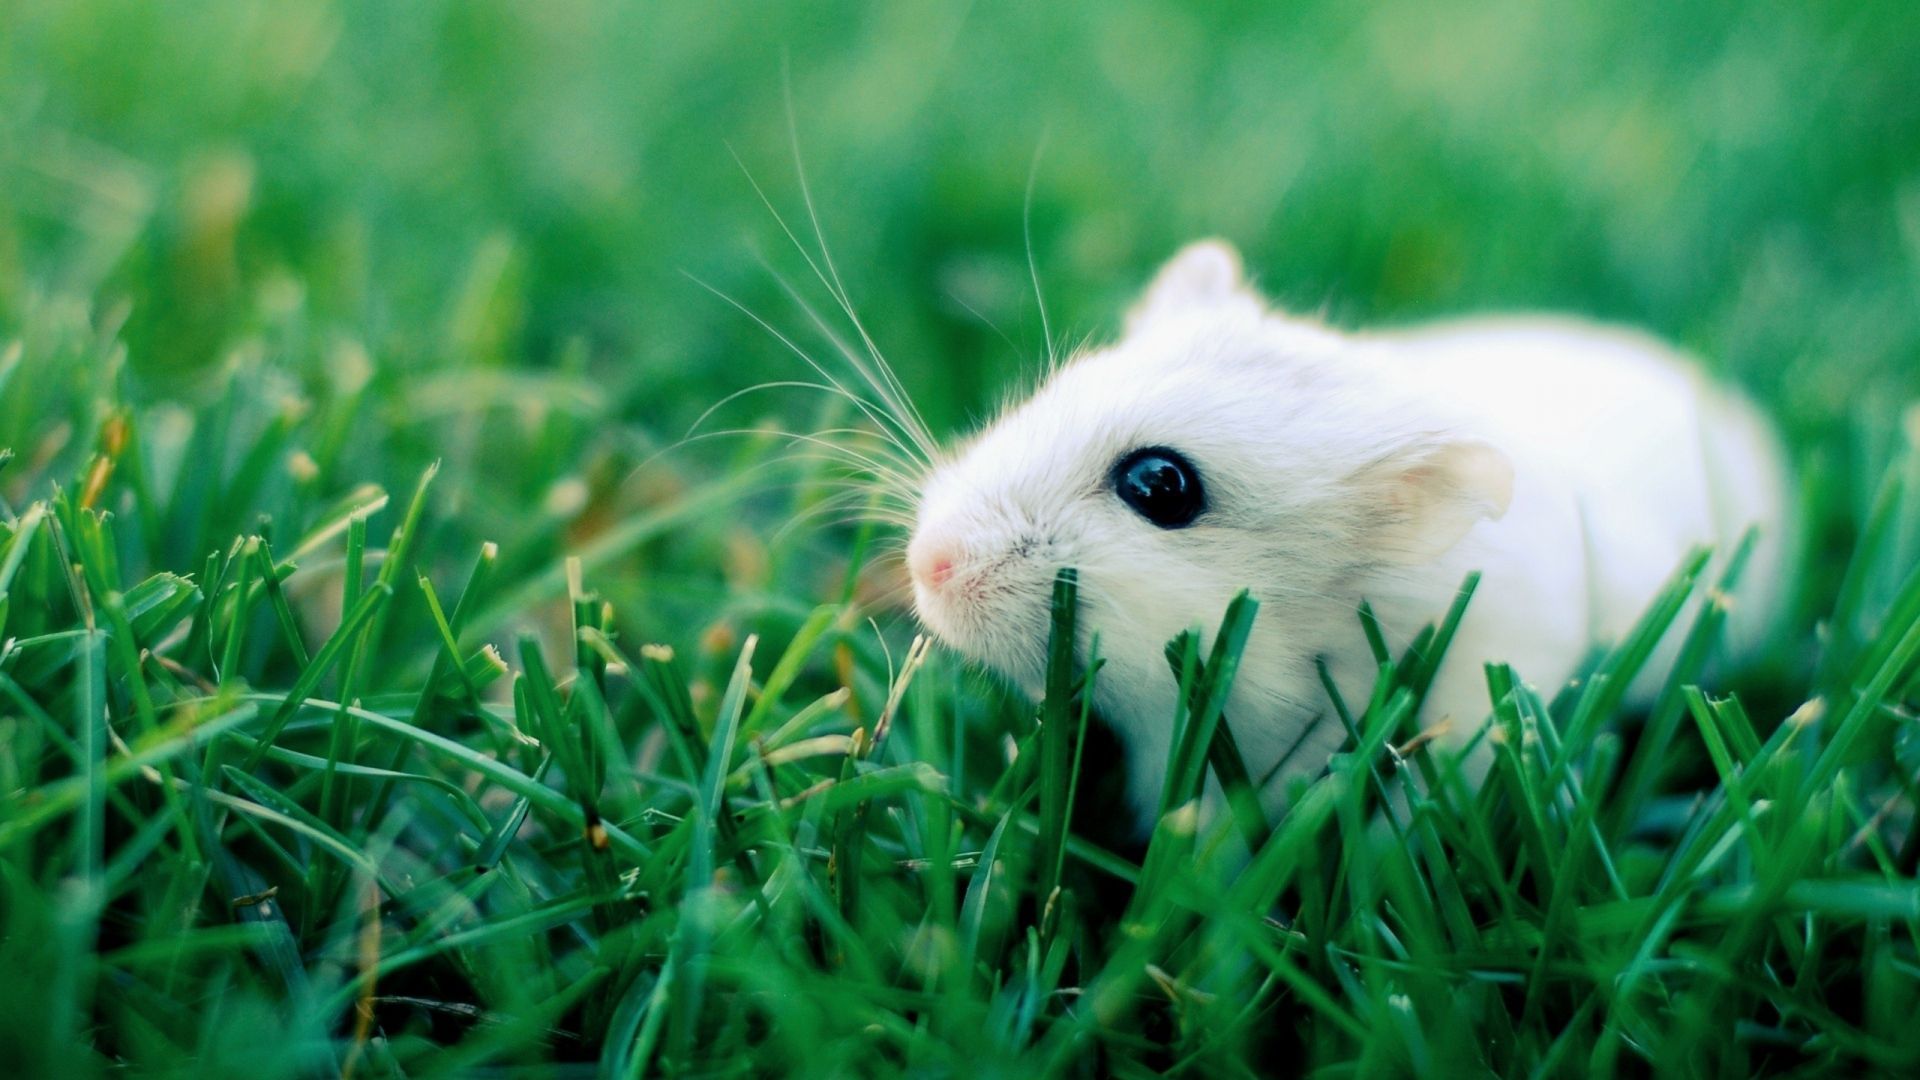 Download Wallpaper 1920x1080 Hamster, Grass, Rodent, Crawling Full ...